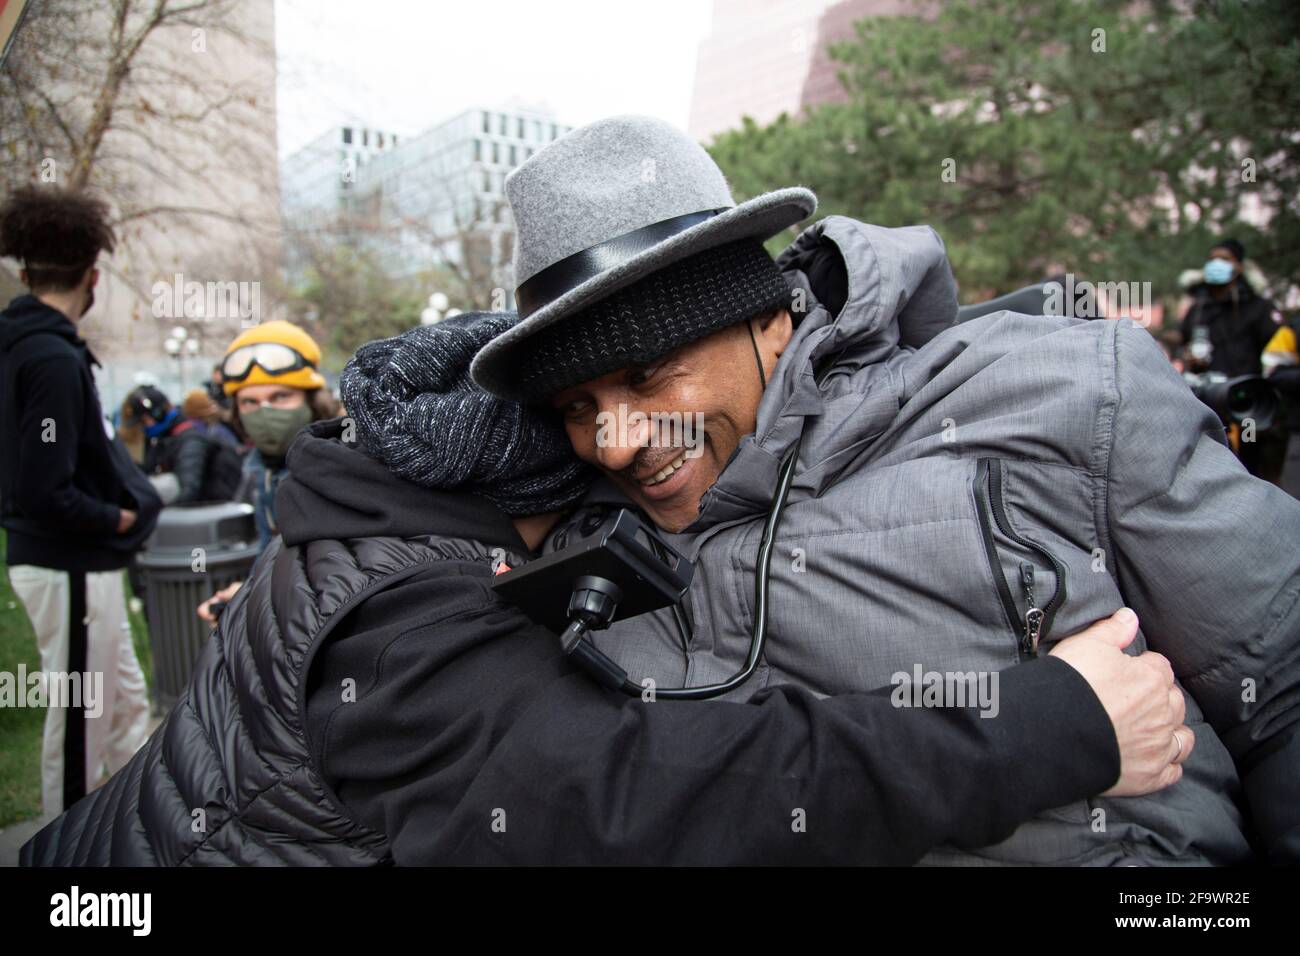 Minneapolis, Minnesota, USA. 20th Apr, 2021. April 20, 2021-Minneapolis, Minnesota, USA: Michael Jones embraces another reveler to celebrate the guilty verdict in Derek Chauvin's case. Minneapolis residents celebrated Derek Chauvin's guilty verdict for the murder of George Floyd on May 25, 2020. Credit: Henry Pan/ZUMA Wire/Alamy Live News Stock Photo